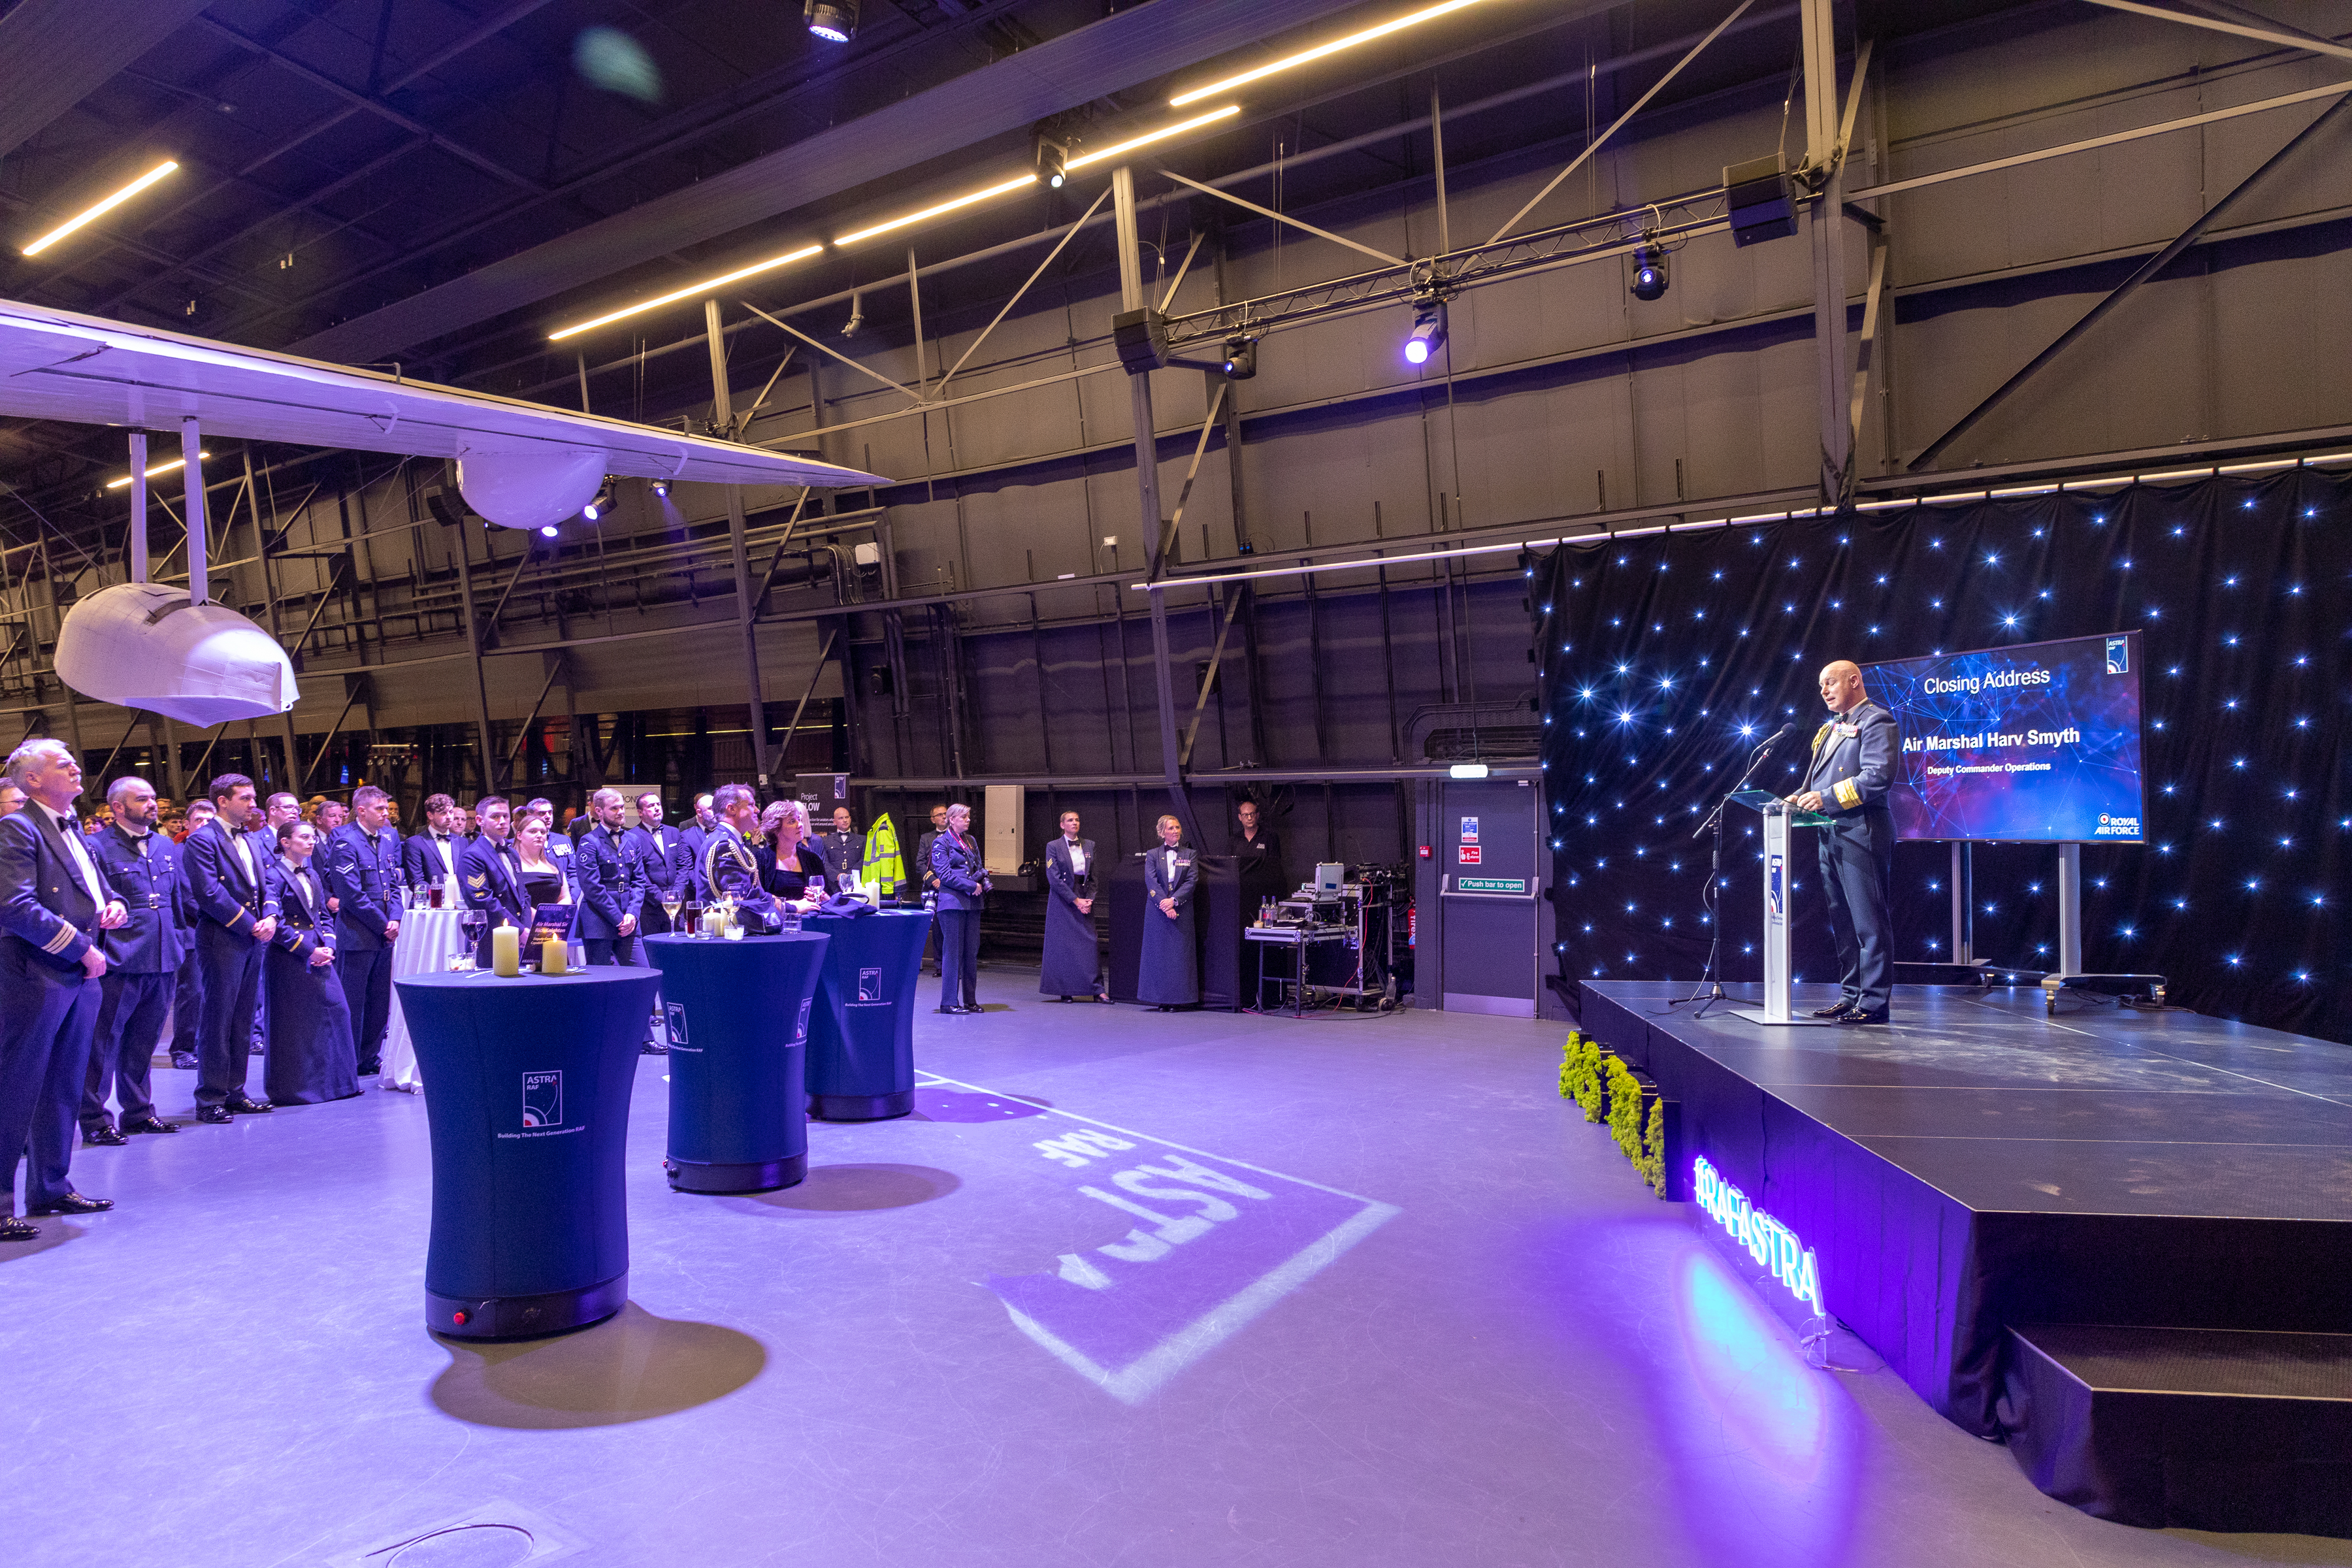 Image shows RAF personnel inside RAF Museum during awards ceremony.